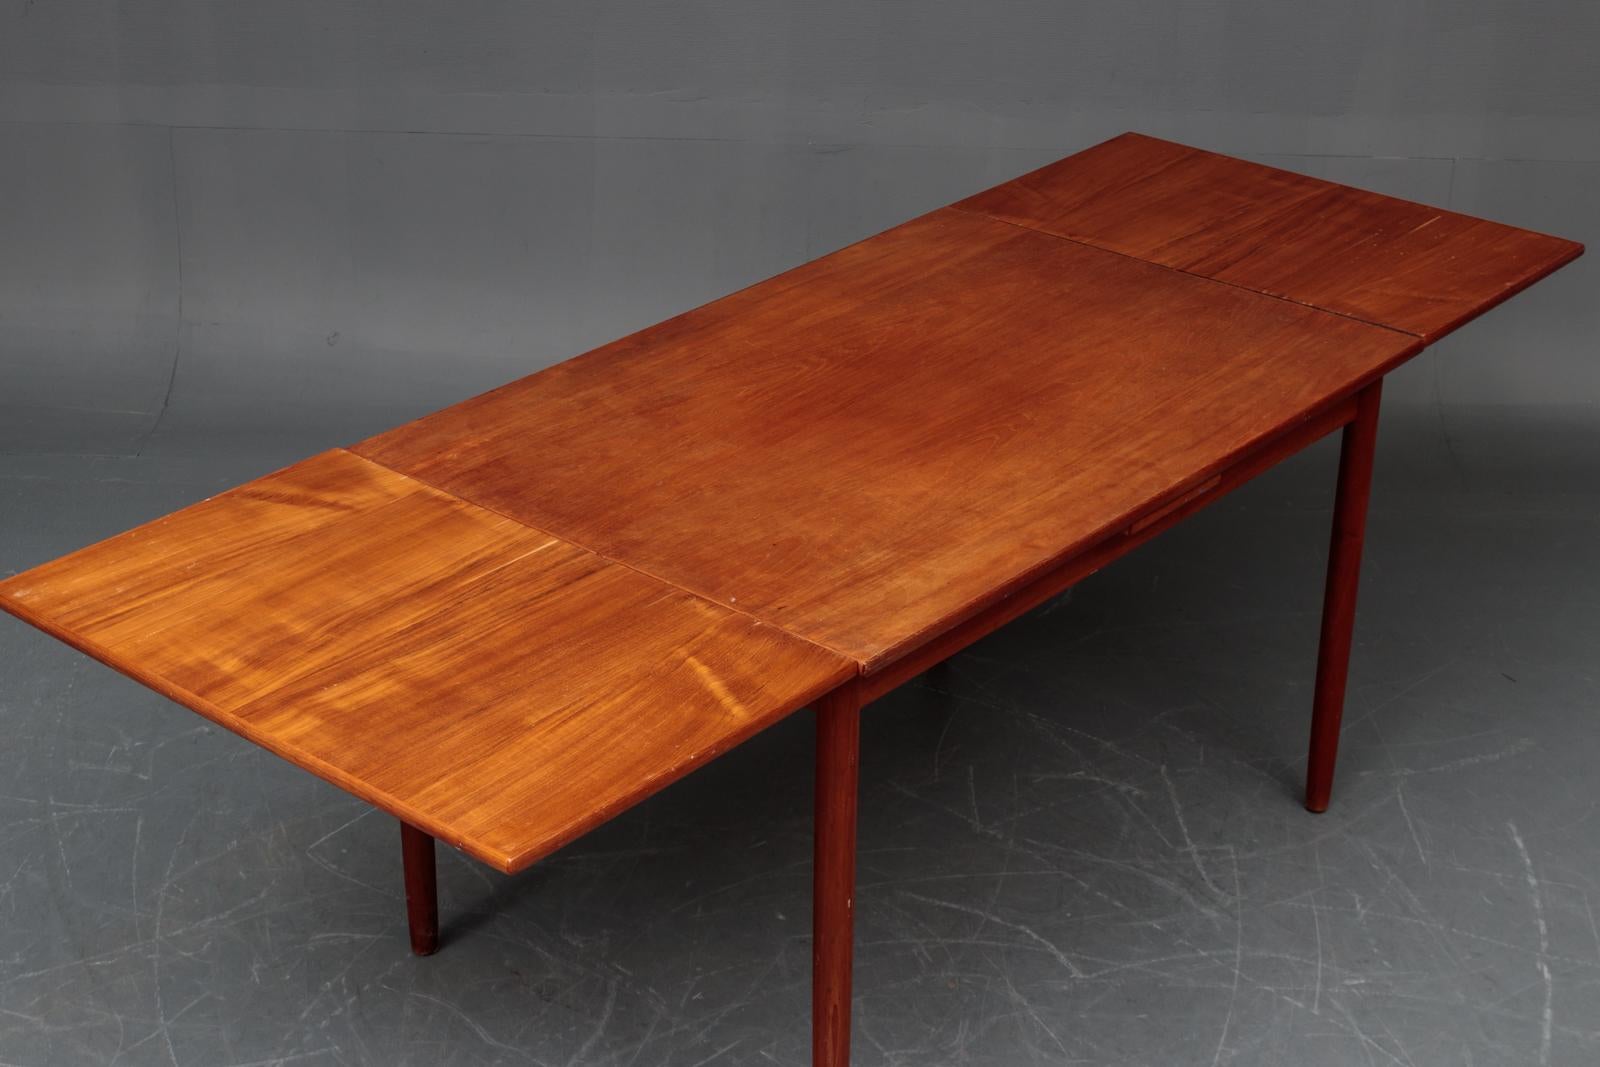 Danish teak dining table with extensions for additional seating.